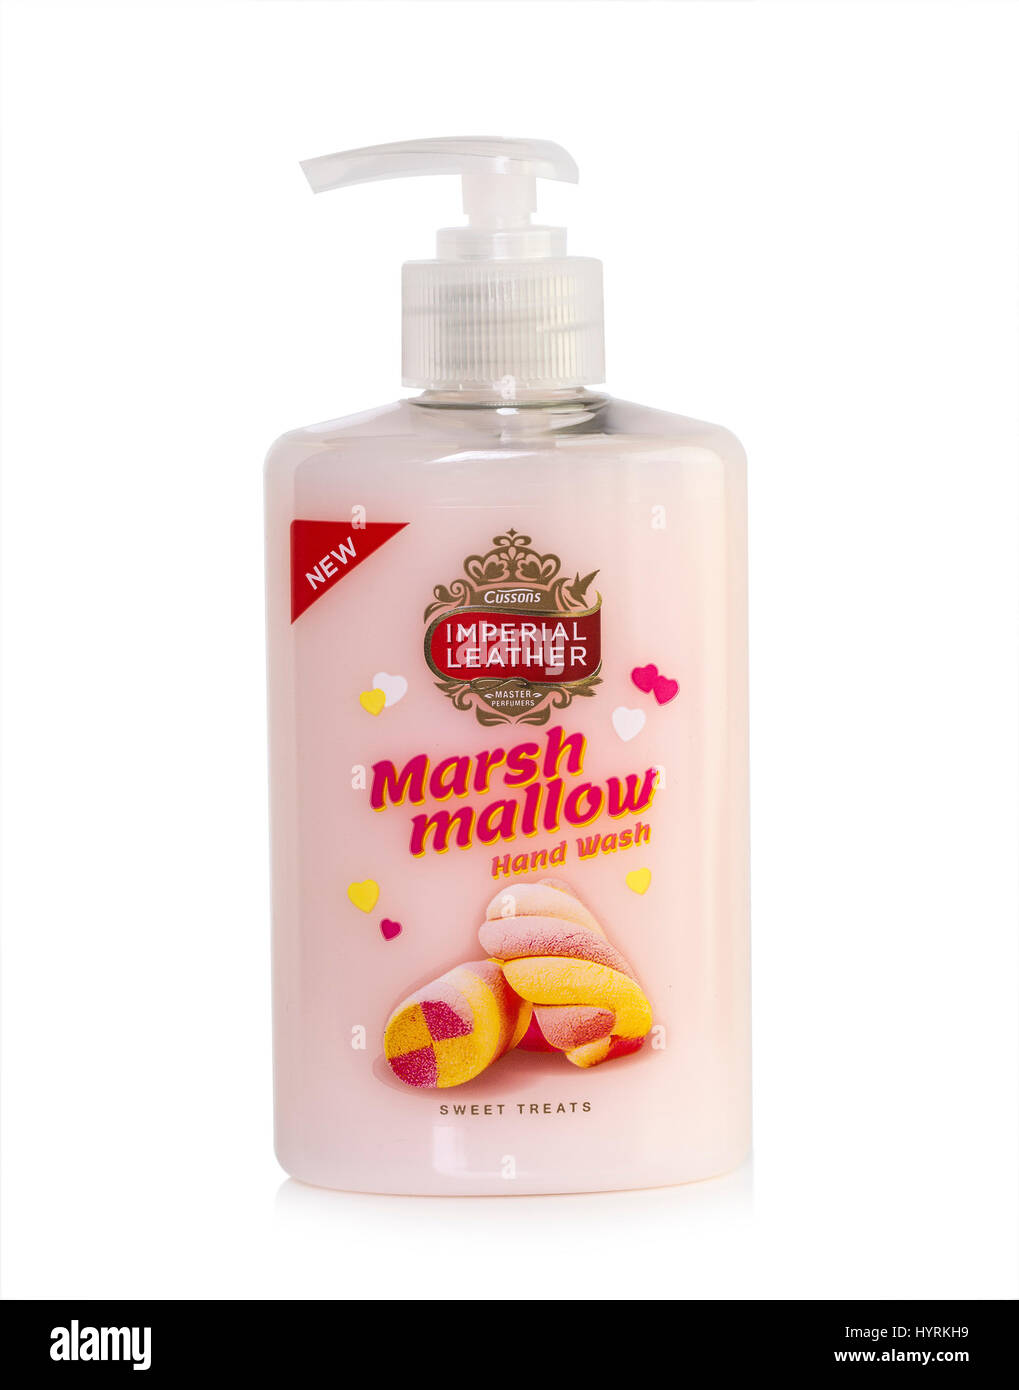 Cussons Imperial Leather Marsh Mallow Hand Wash on a white background Stock  Photo - Alamy